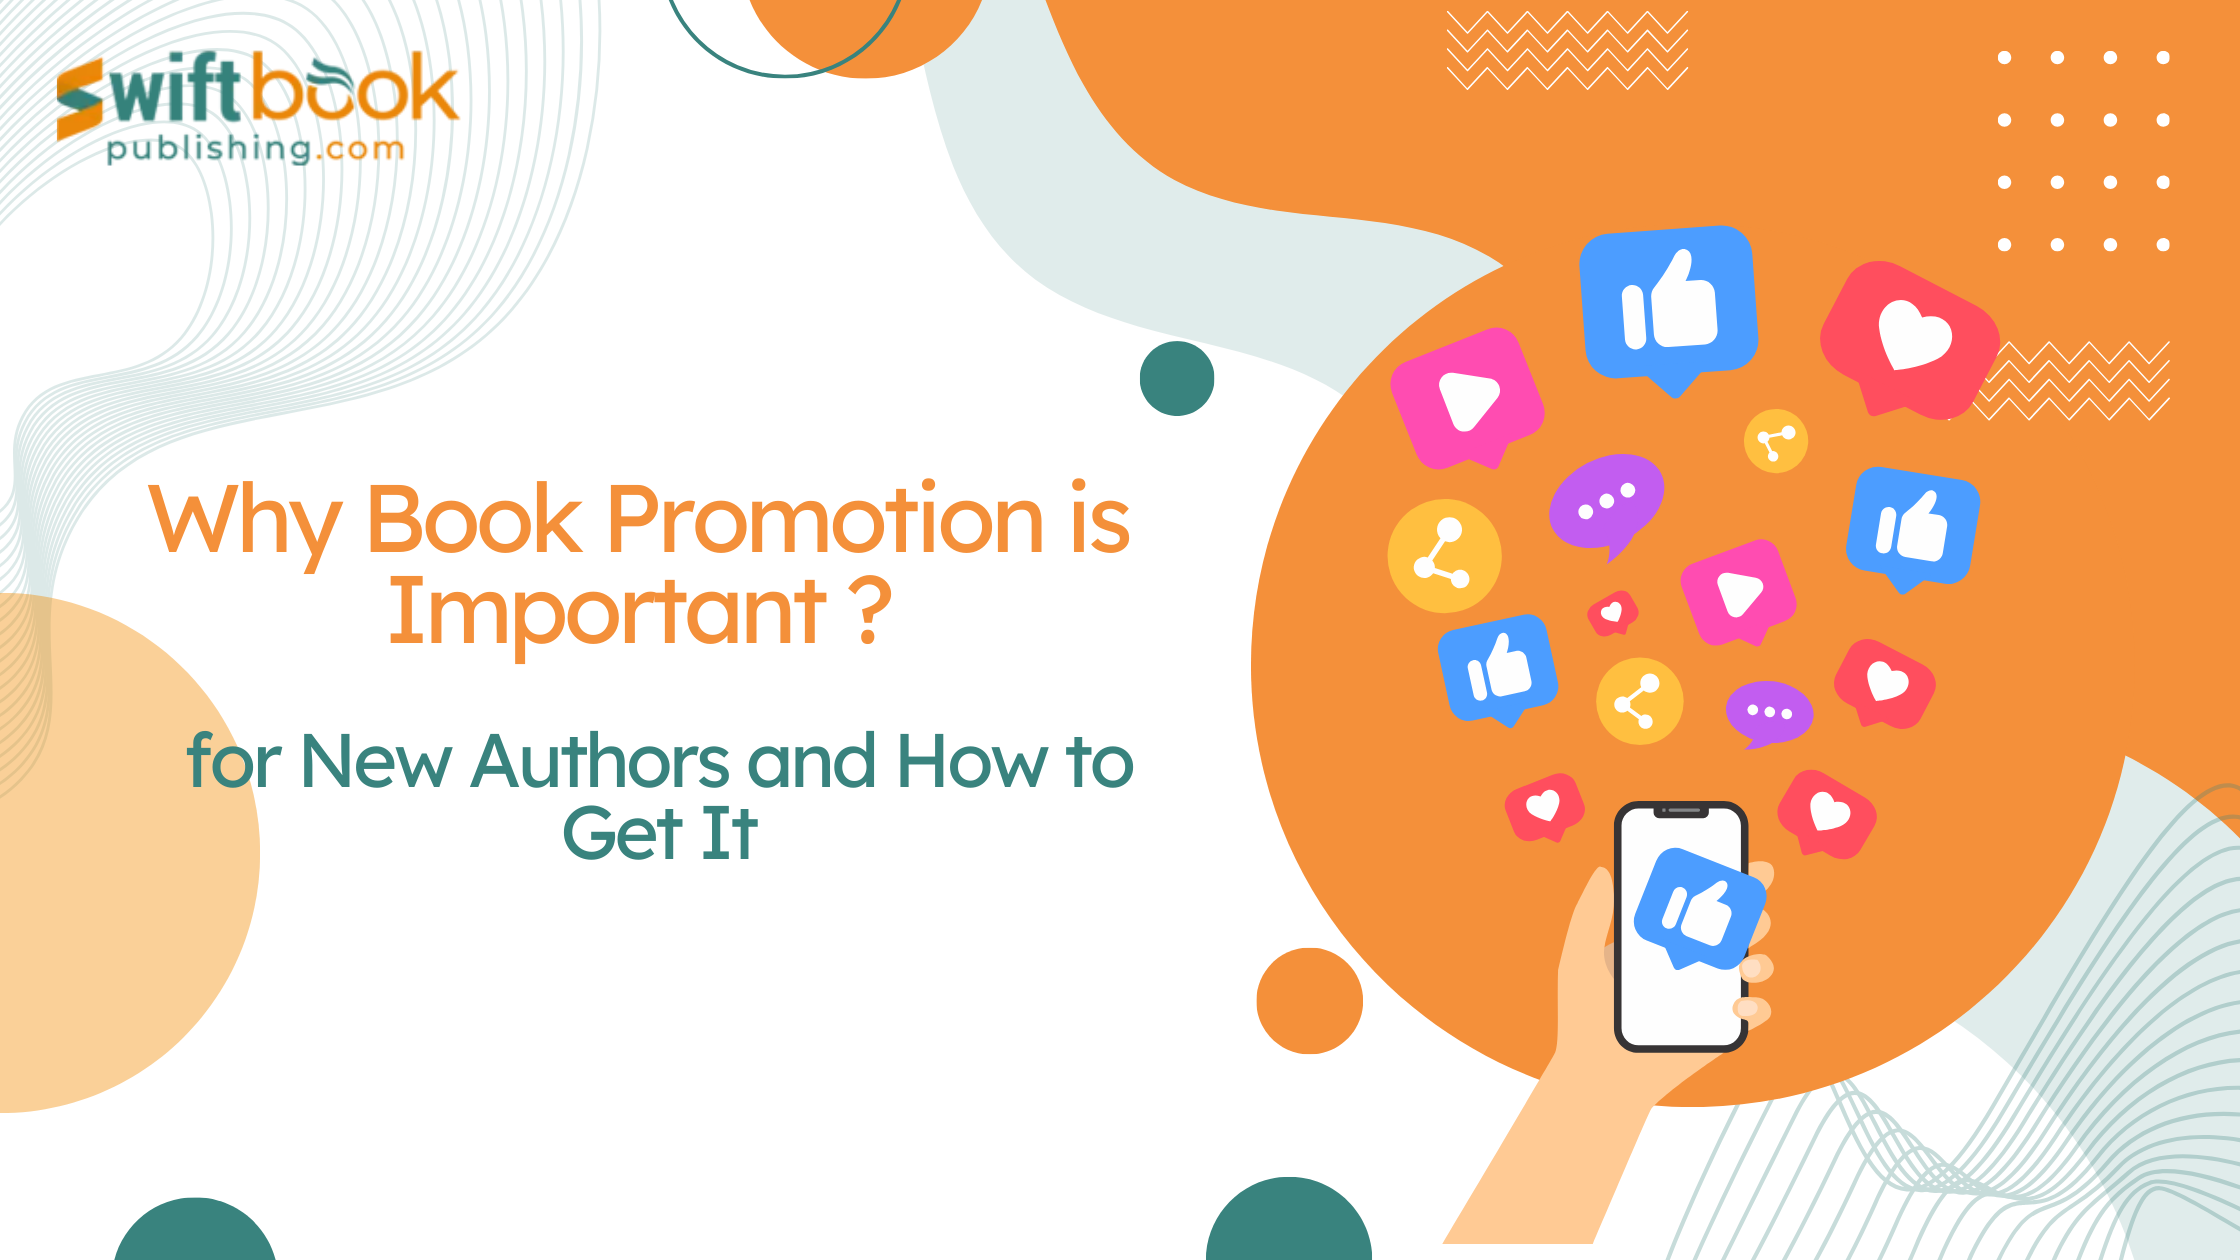 Why Book Promotion is Important for New Authors and how to get it